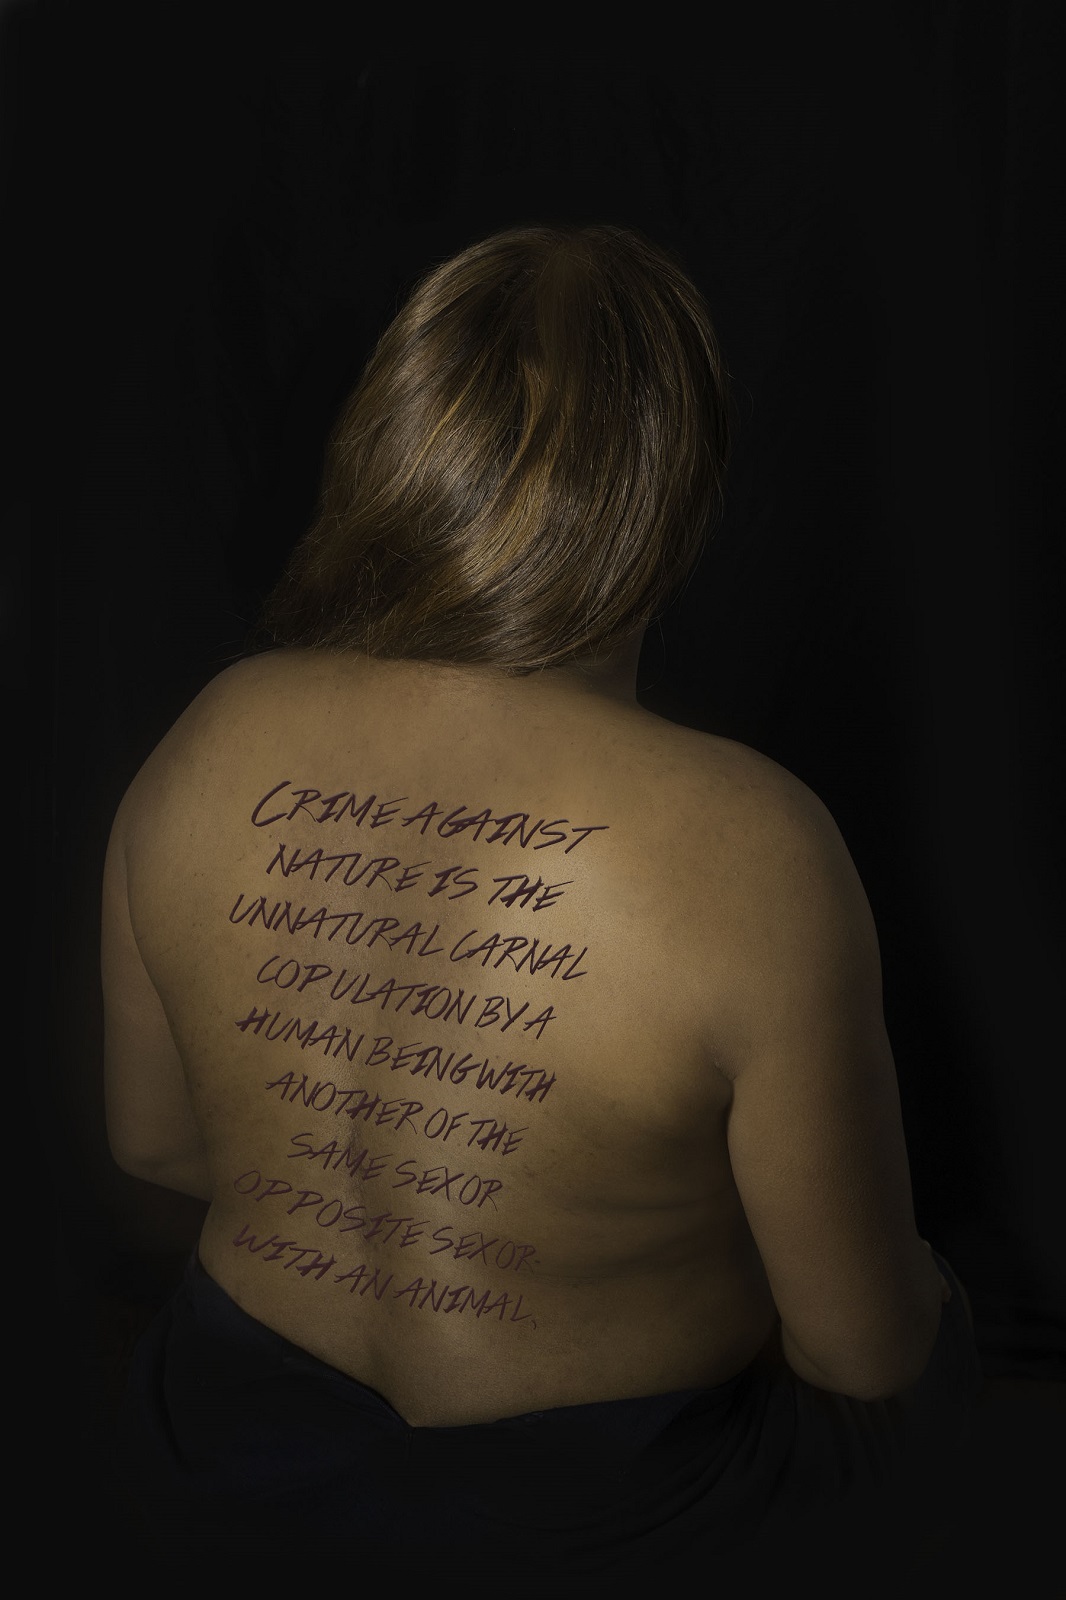 Photograph of a dark skinned woman wiht her back exposed, not wearing a shirt, with writing on her back